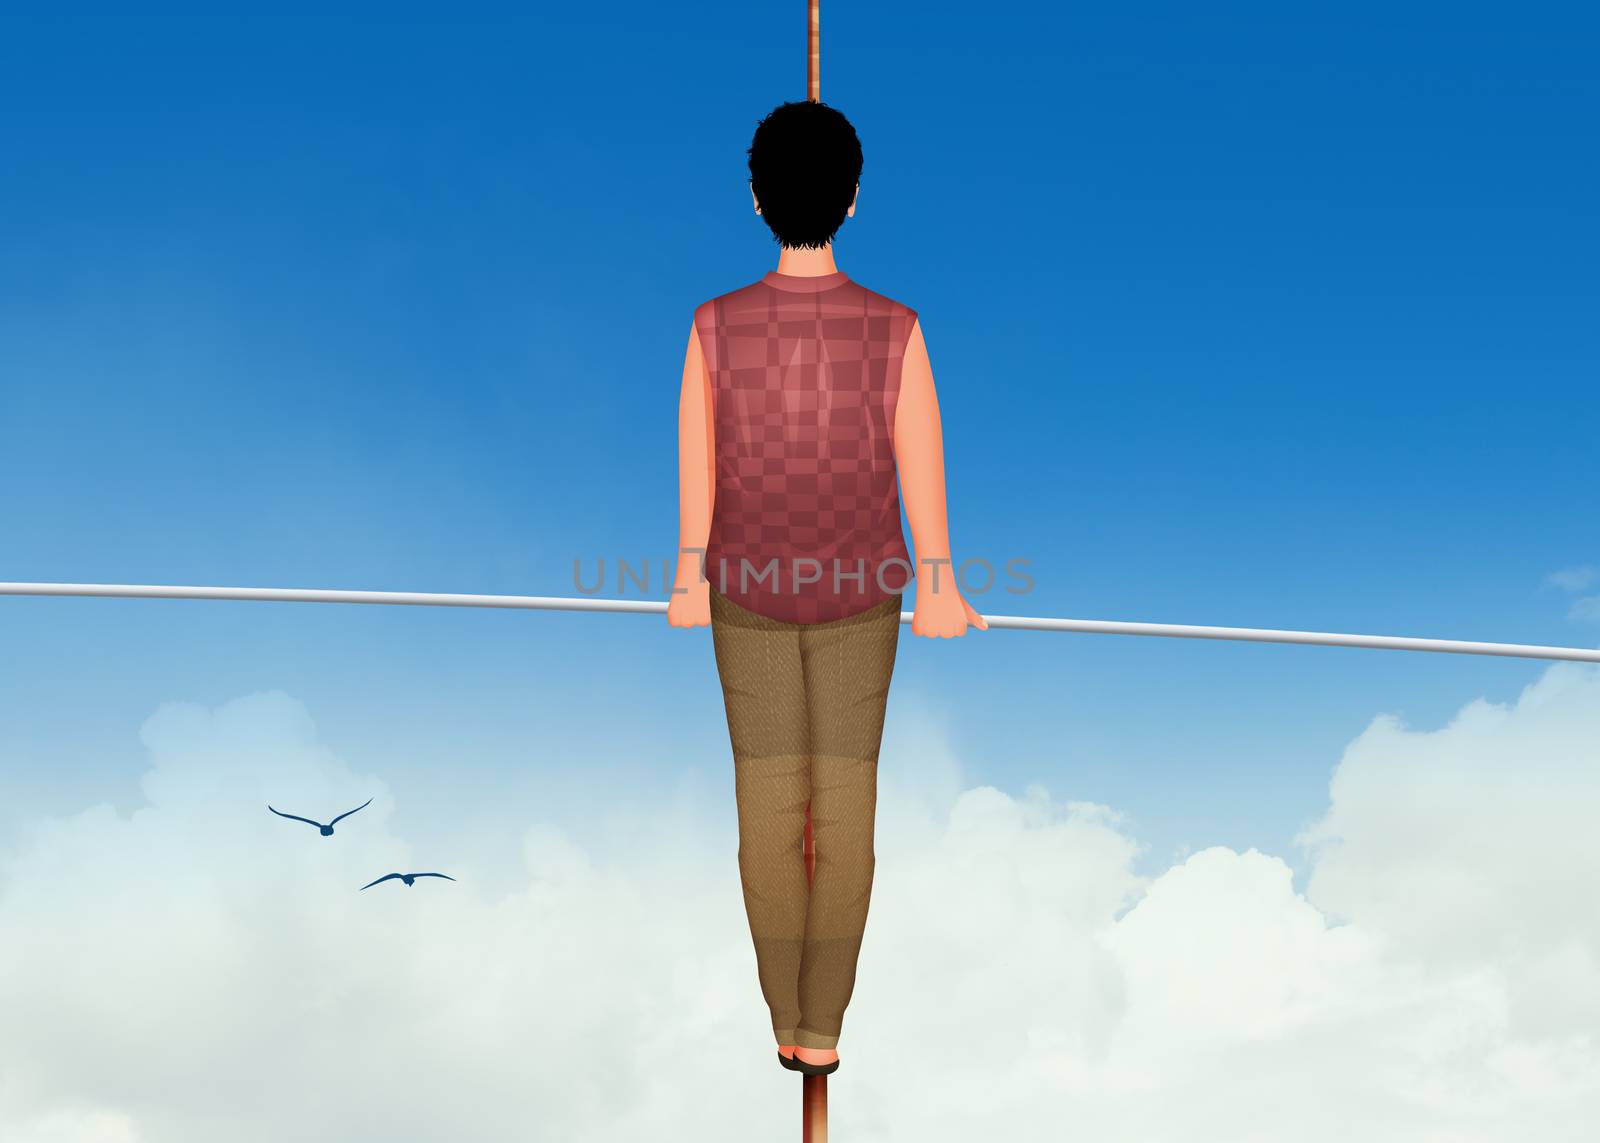 the tightrope walker on the wire by adrenalina